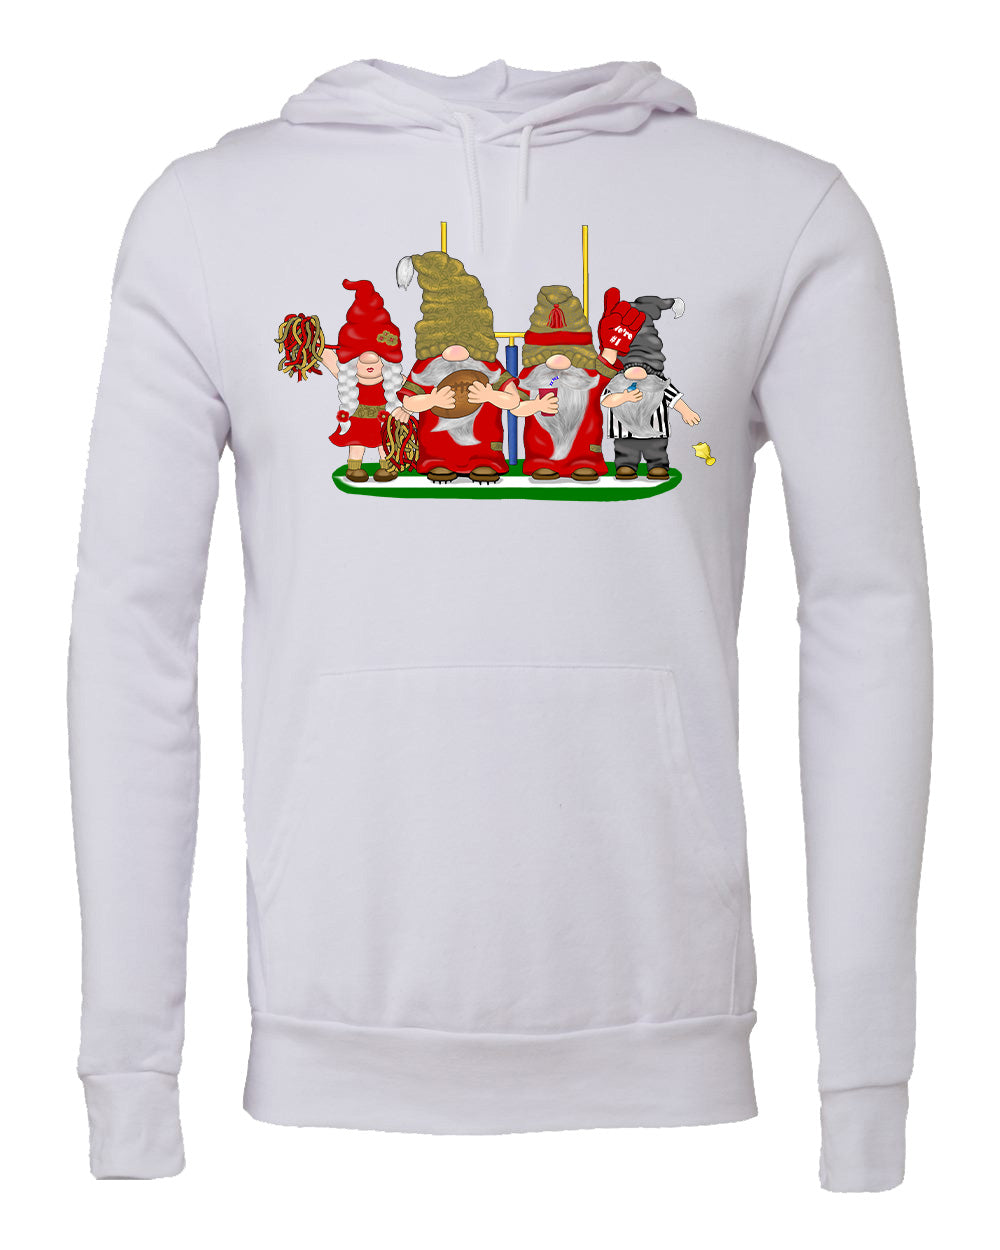 Red & Gold Football Gnomes (similar to San Fransisco) on Hoodie